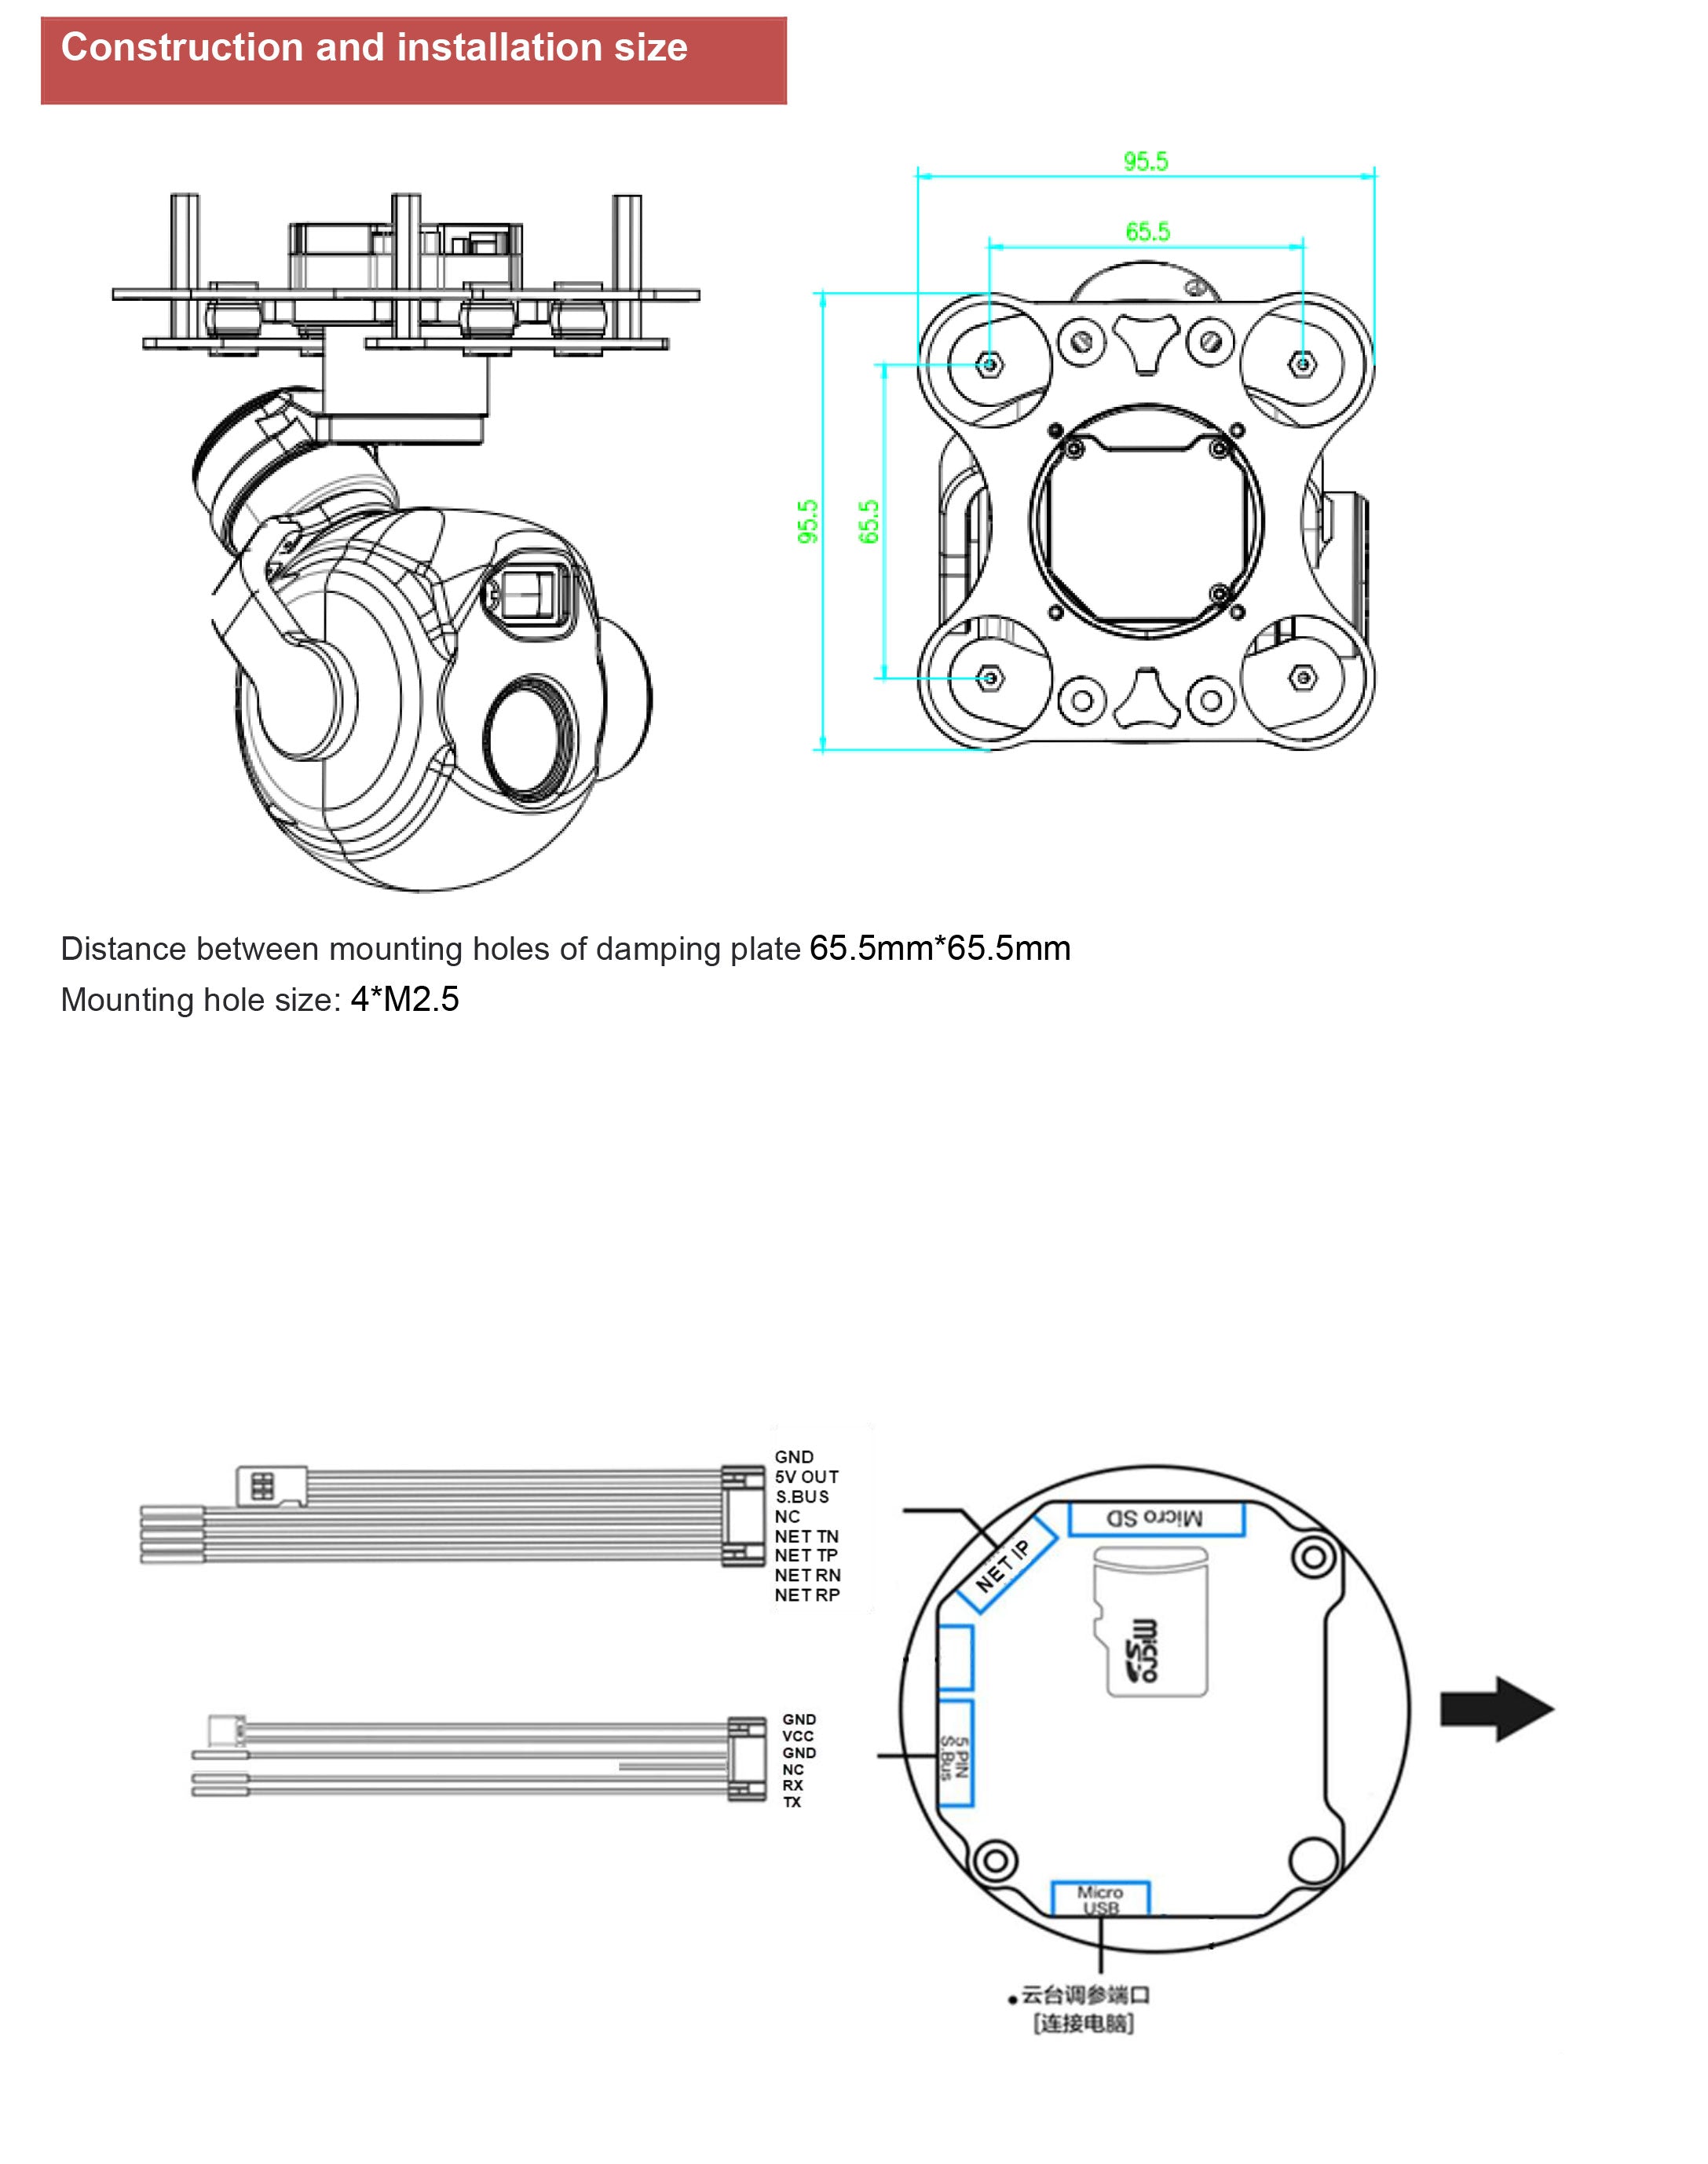 TOPOTEK SIP10L11A Dual Light Drone Gimbal, 95.5x65.5x8mm drone frame with mounting plate and various connectivity options.